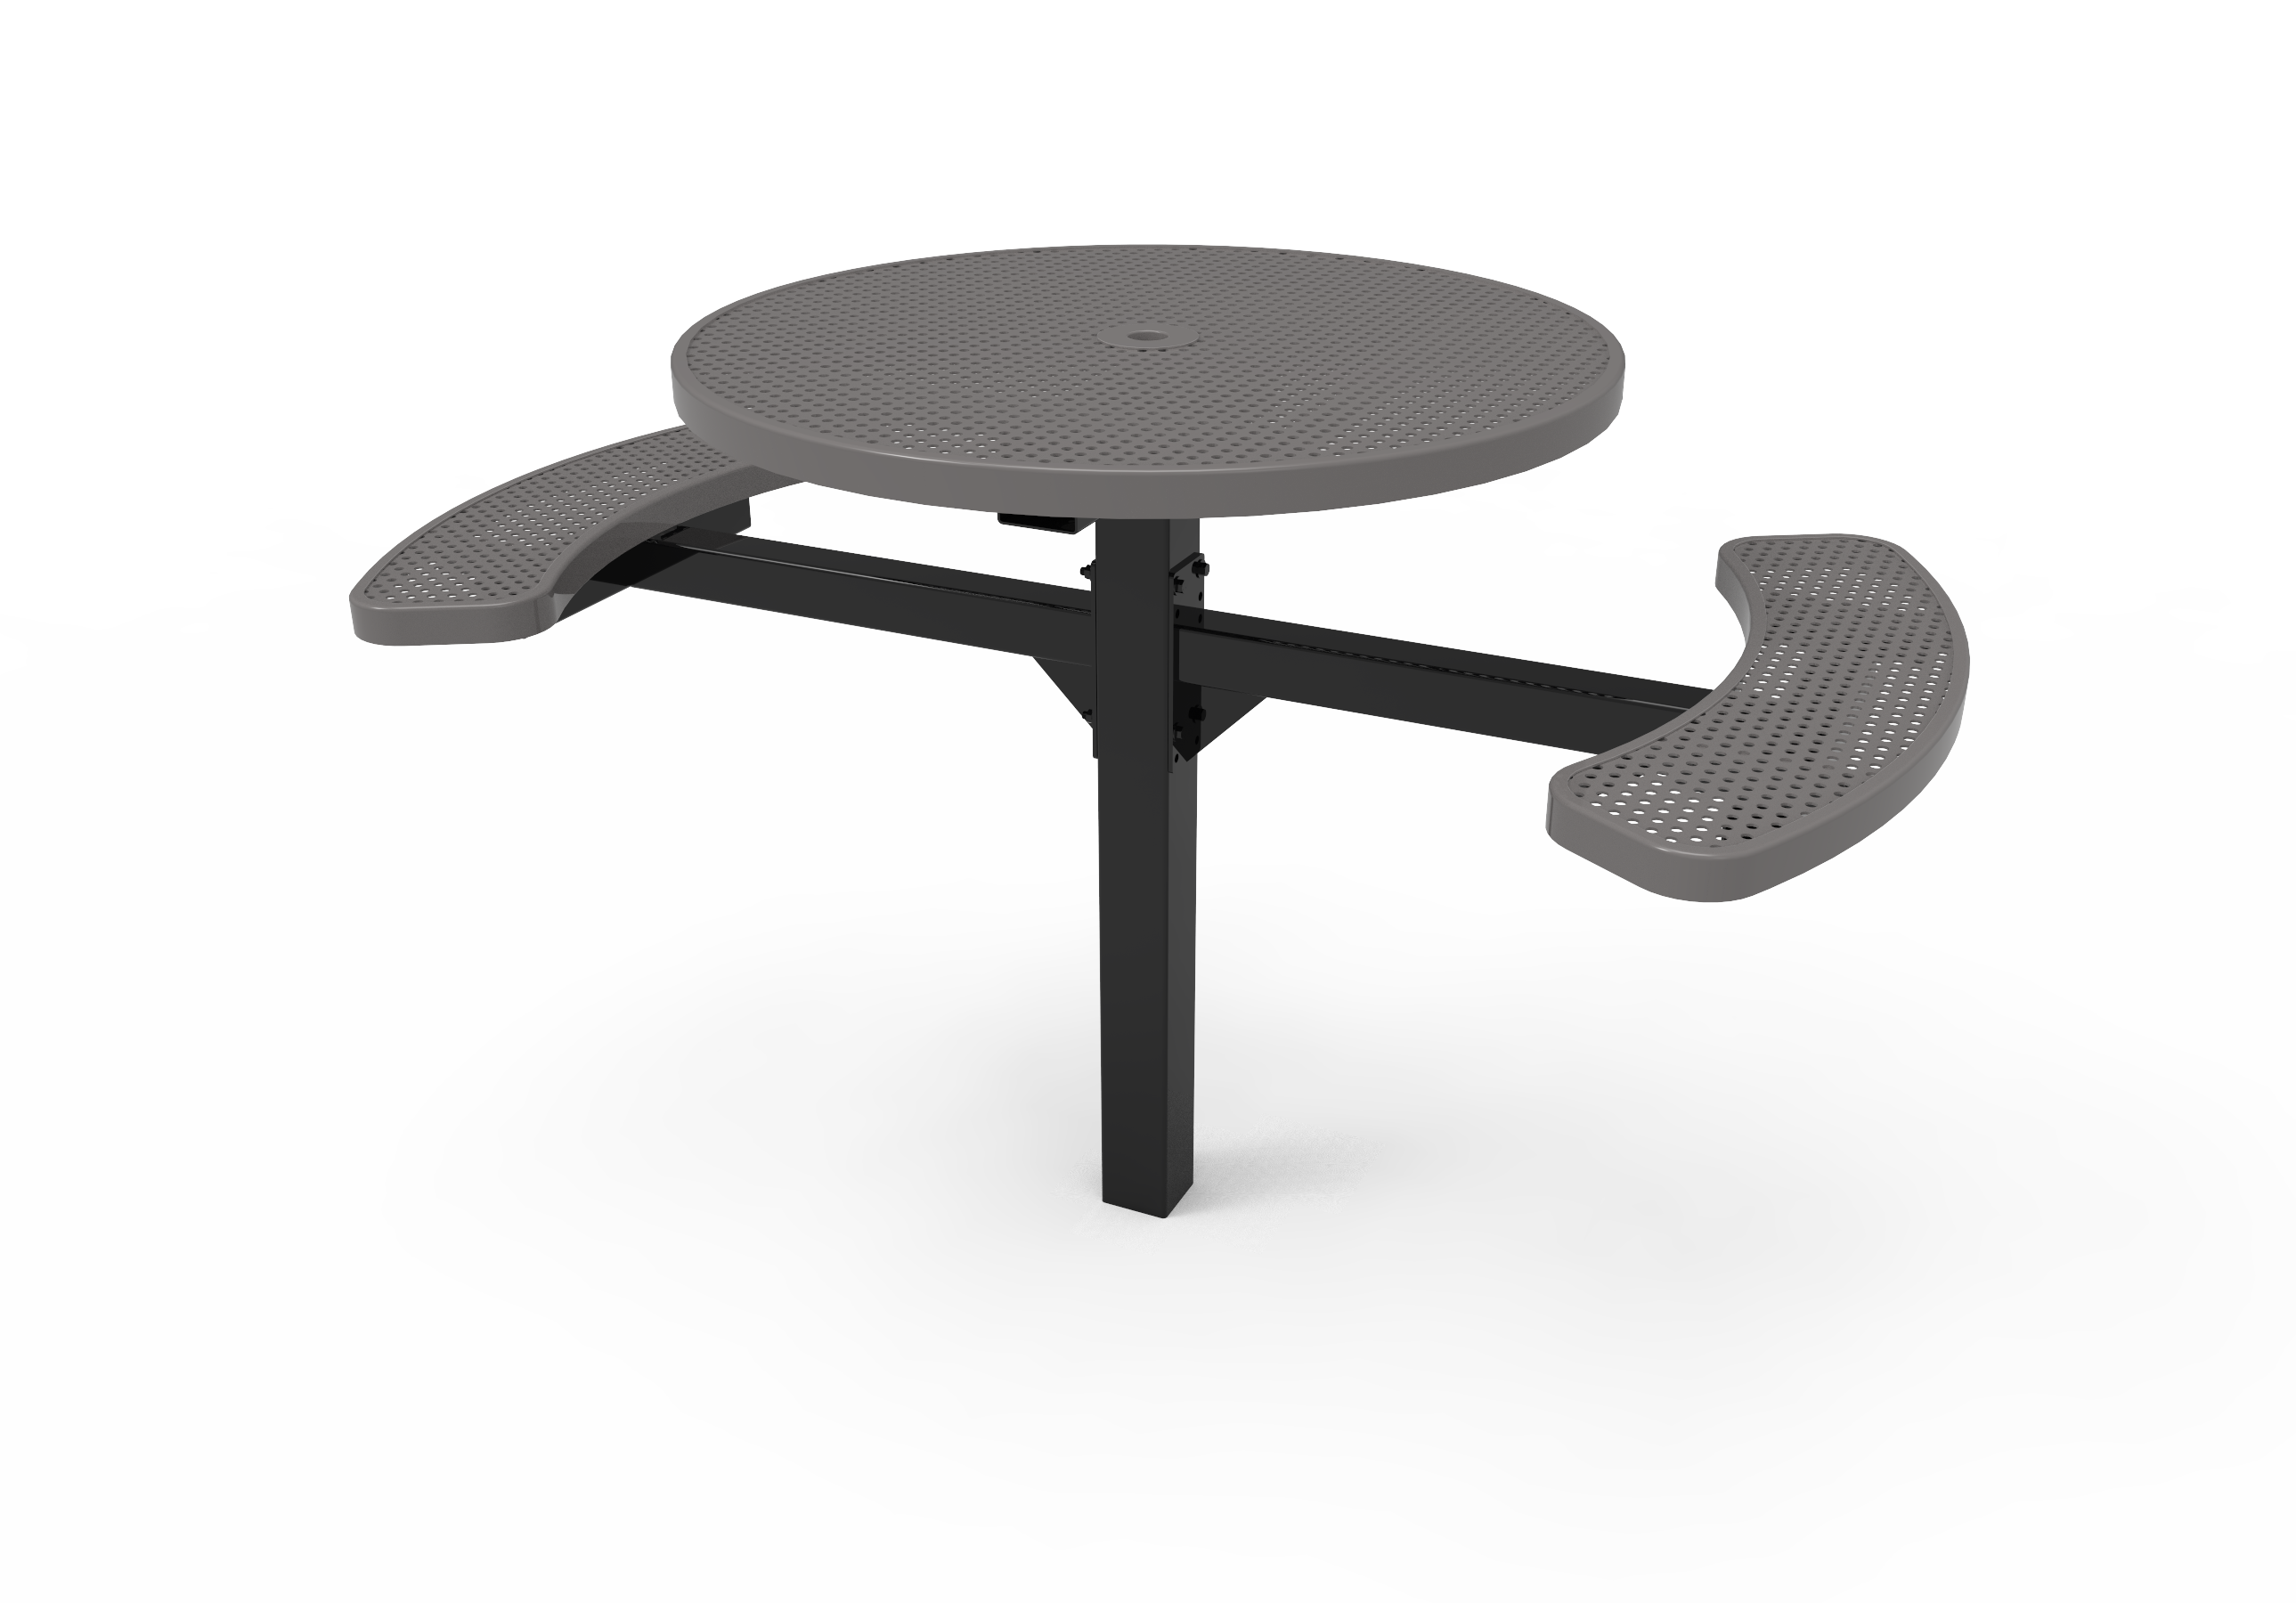 Lexington Round Pedestal Table - ADA Accessible, Frame with Powder Coat Finish, Top with Advance DuraLex Coating